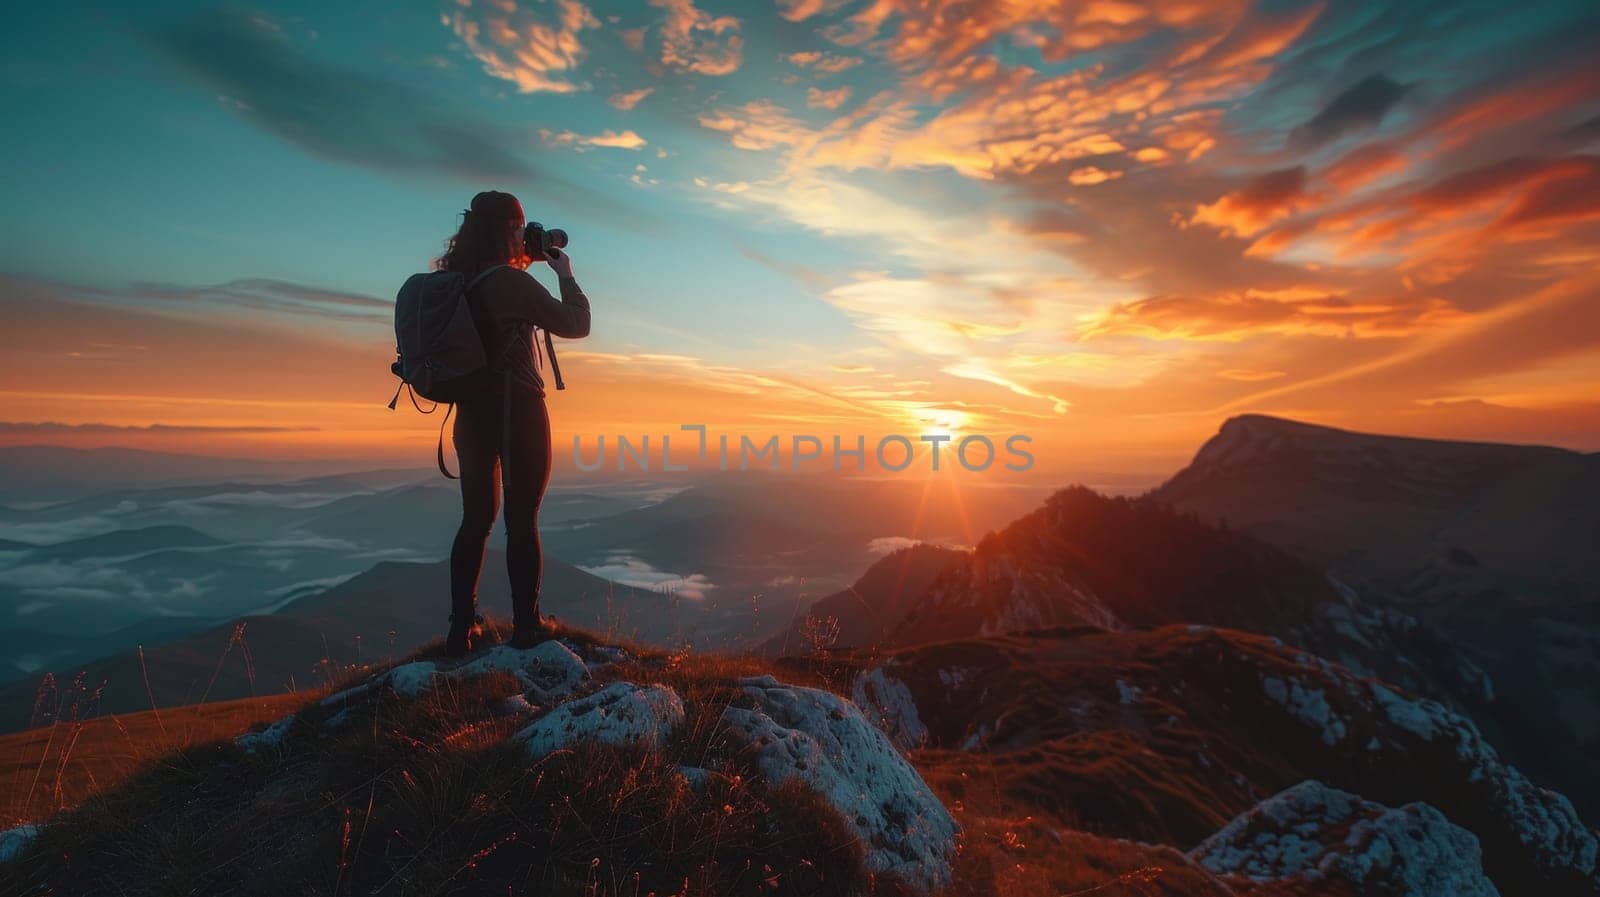 A woman is taking a picture of the sunset from a mountain top. The sky is filled with clouds and the sun is setting, creating a beautiful and serene atmosphere